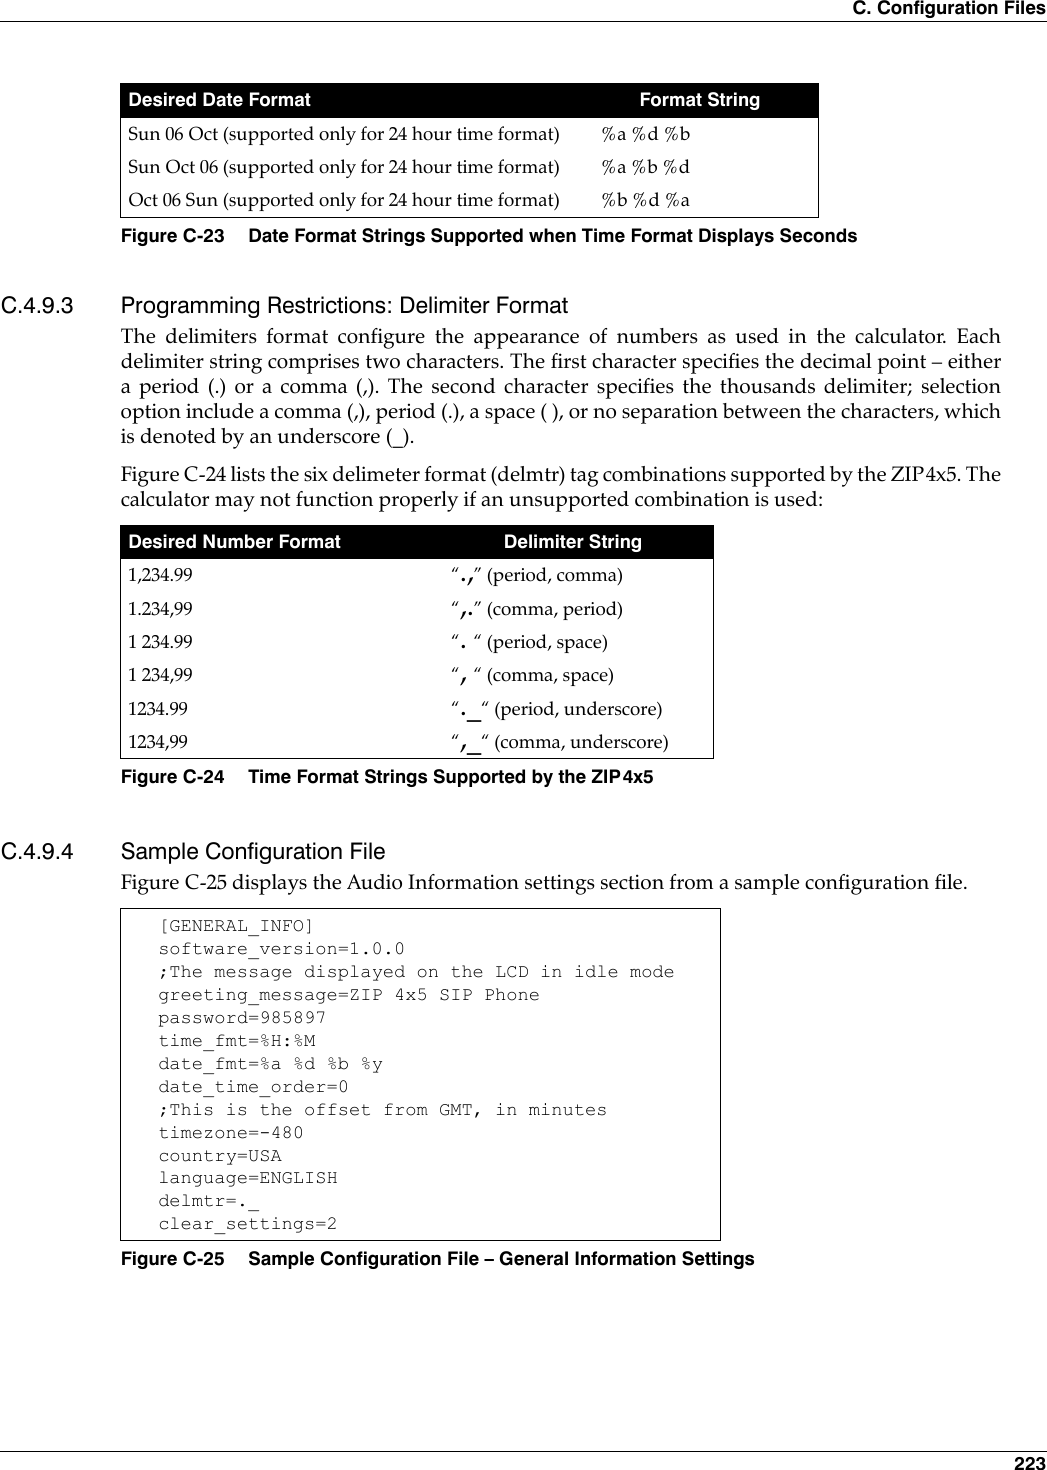 C. Configuration Files 223C.4.9.3 Programming Restrictions: Delimiter FormatThe delimiters format configure the appearance of numbers as used in the calculator. Eachdelimiter string comprises two characters. The first character specifies the decimal point – eithera period (.) or a comma (,). The second character specifies the thousands delimiter; selectionoption include a comma (,), period (.), a space ( ), or no separation between the characters, whichis denoted by an underscore (_).Figure C-24 lists the six delimeter format (delmtr) tag combinations supported by the ZIP4x5. Thecalculator may not function properly if an unsupported combination is used: C.4.9.4 Sample Configuration File Figure C-25 displays the Audio Information settings section from a sample configuration file.Sun 06 Oct (supported only for 24 hour time format) %a %d %bSun Oct 06 (supported only for 24 hour time format) %a %b %dOct 06 Sun (supported only for 24 hour time format) %b %d %aDesired Number Format Delimiter String1,234.99 “.,” (period, comma)1.234,99 “,.” (comma, period)1 234.99 “. “ (period, space)1 234,99 “, “ (comma, space)1234.99 “._“ (period, underscore)1234,99 “,_“ (comma, underscore)Figure C-24 Time Format Strings Supported by the ZIP4x5[GENERAL_INFO]software_version=1.0.0;The message displayed on the LCD in idle modegreeting_message=ZIP 4x5 SIP Phonepassword=985897time_fmt=%H:%Mdate_fmt=%a %d %b %ydate_time_order=0;This is the offset from GMT, in minutestimezone=-480country=USAlanguage=ENGLISHdelmtr=._clear_settings=2Figure C-25 Sample Configuration File – General Information SettingsDesired Date Format Format StringFigure C-23 Date Format Strings Supported when Time Format Displays Seconds